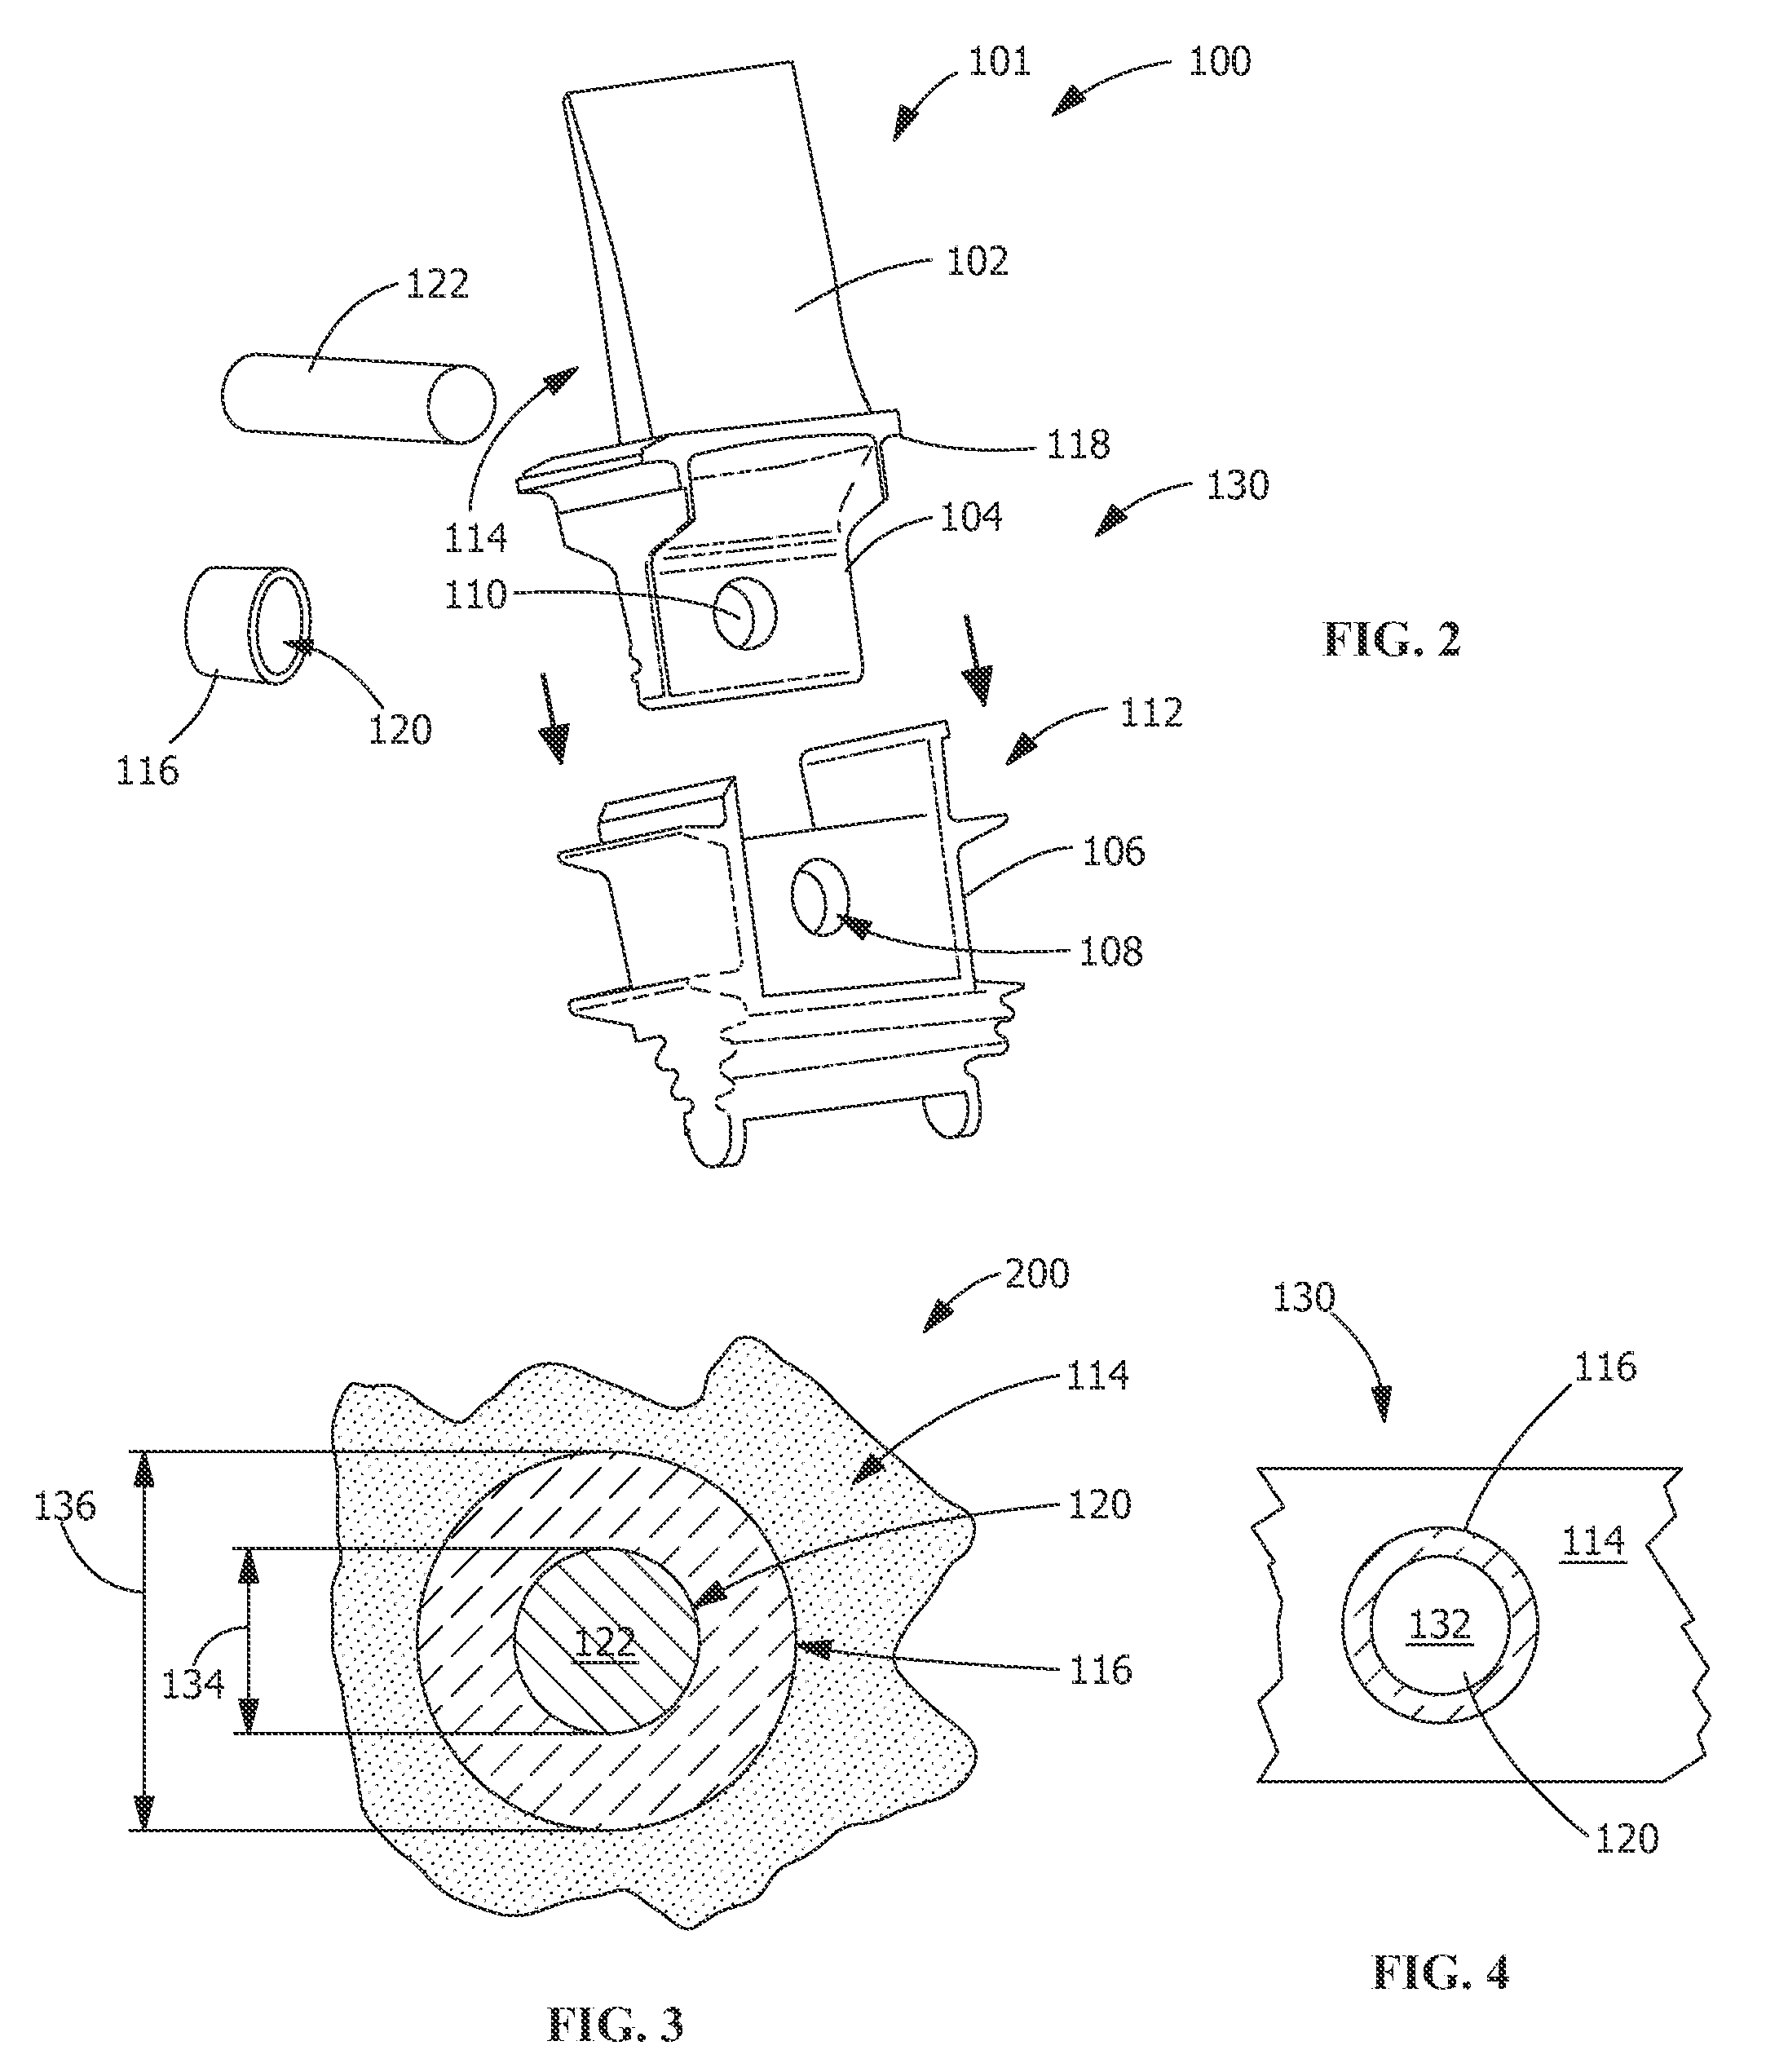 Connecting system for metal components and cmc components, a turbine blade retaining system and a rotating component retaining system